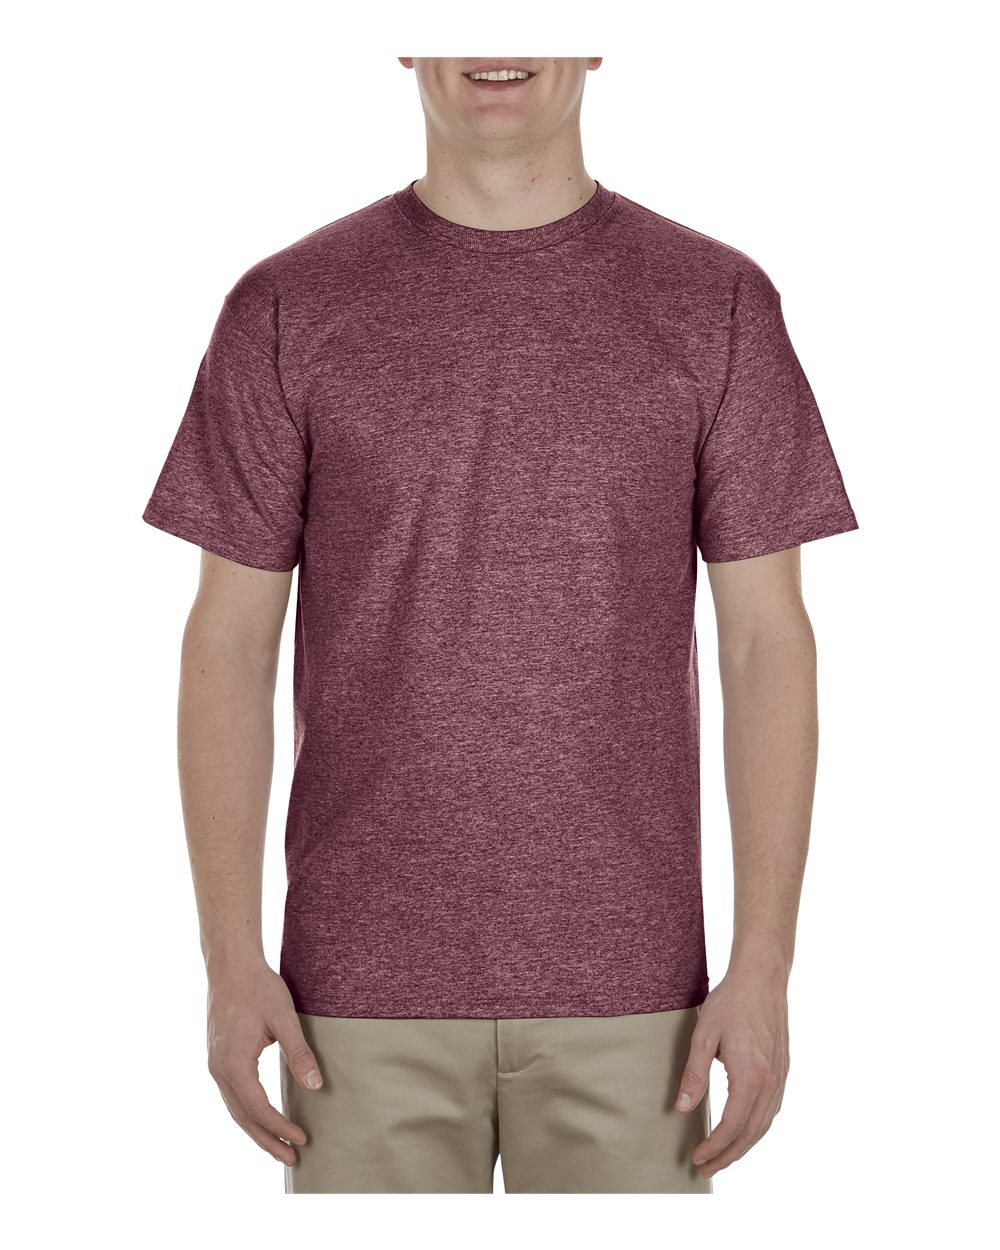 click to view Burgundy Heather